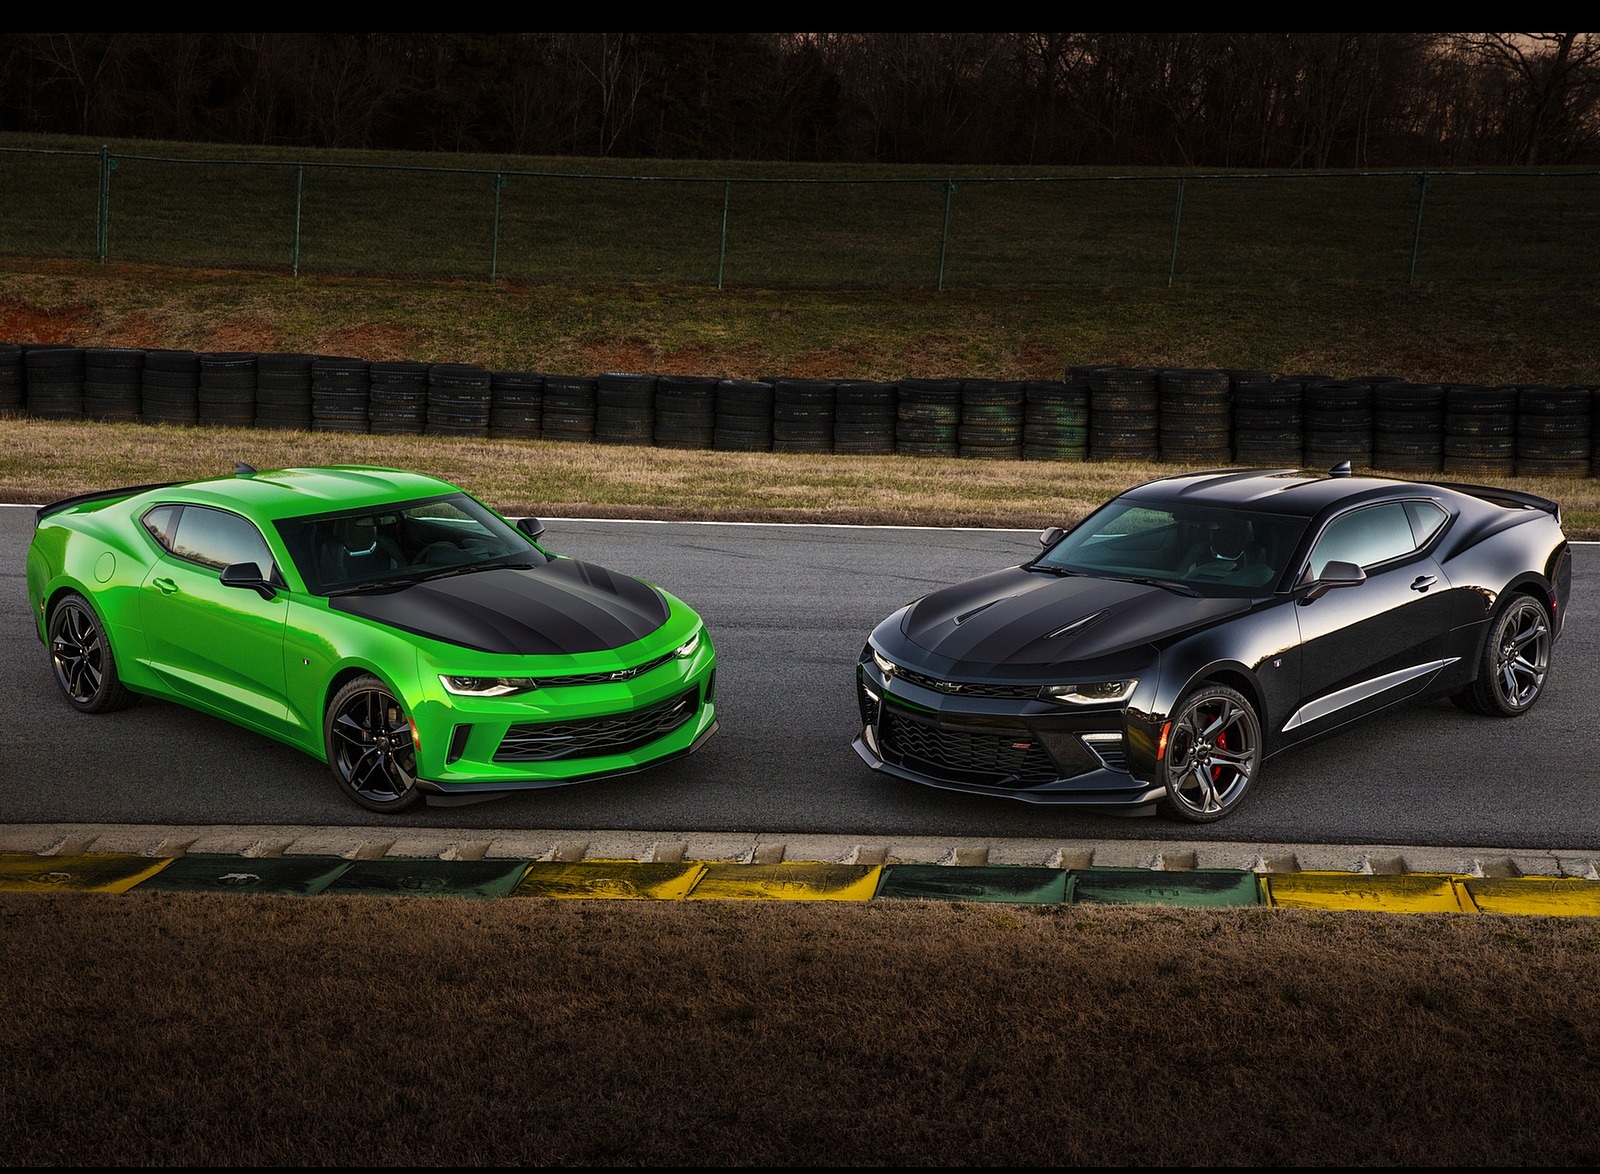 2017 Chevrolet Camaro 1LE Green and Camaro SS 1LE Black with Performance Packages Front Wallpapers (6)